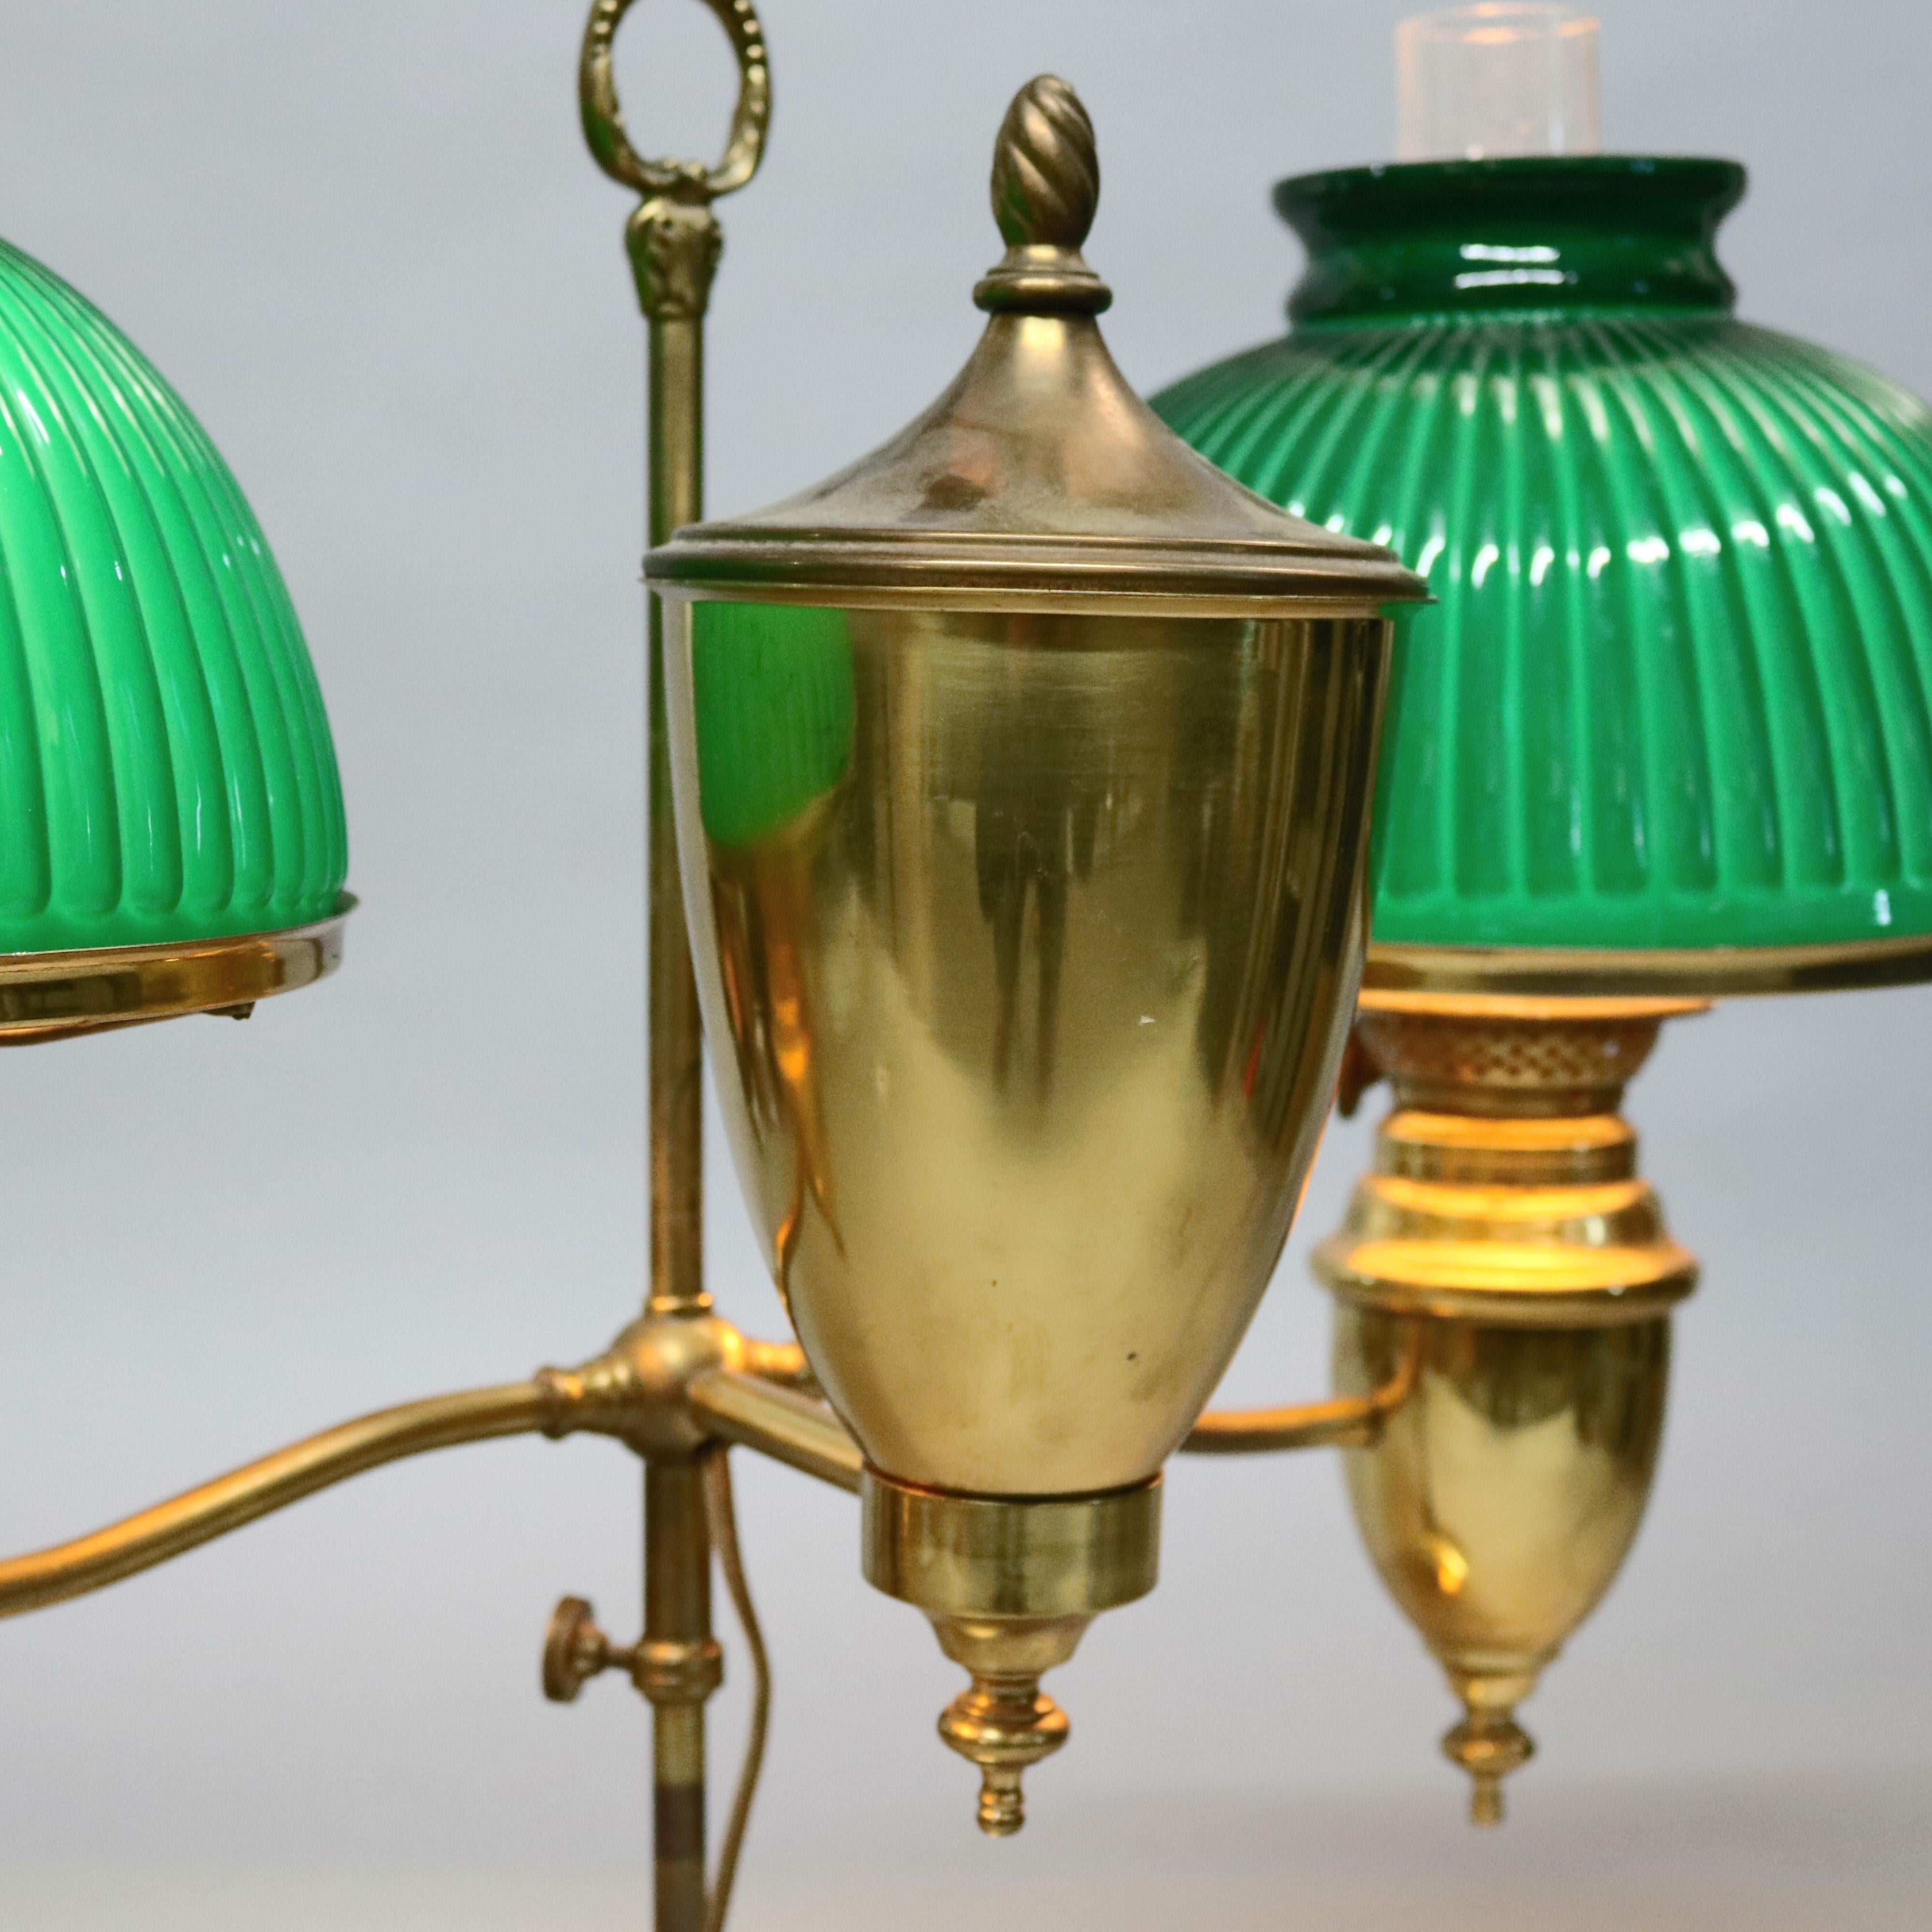 An antique Arts & Crafts double student lamp by Thomas Adams offers brass frame having urn form fonts and adjustable arms terminating in lights with cased glass shades, maker signed burner, circa 1940.

Measures- 20.25